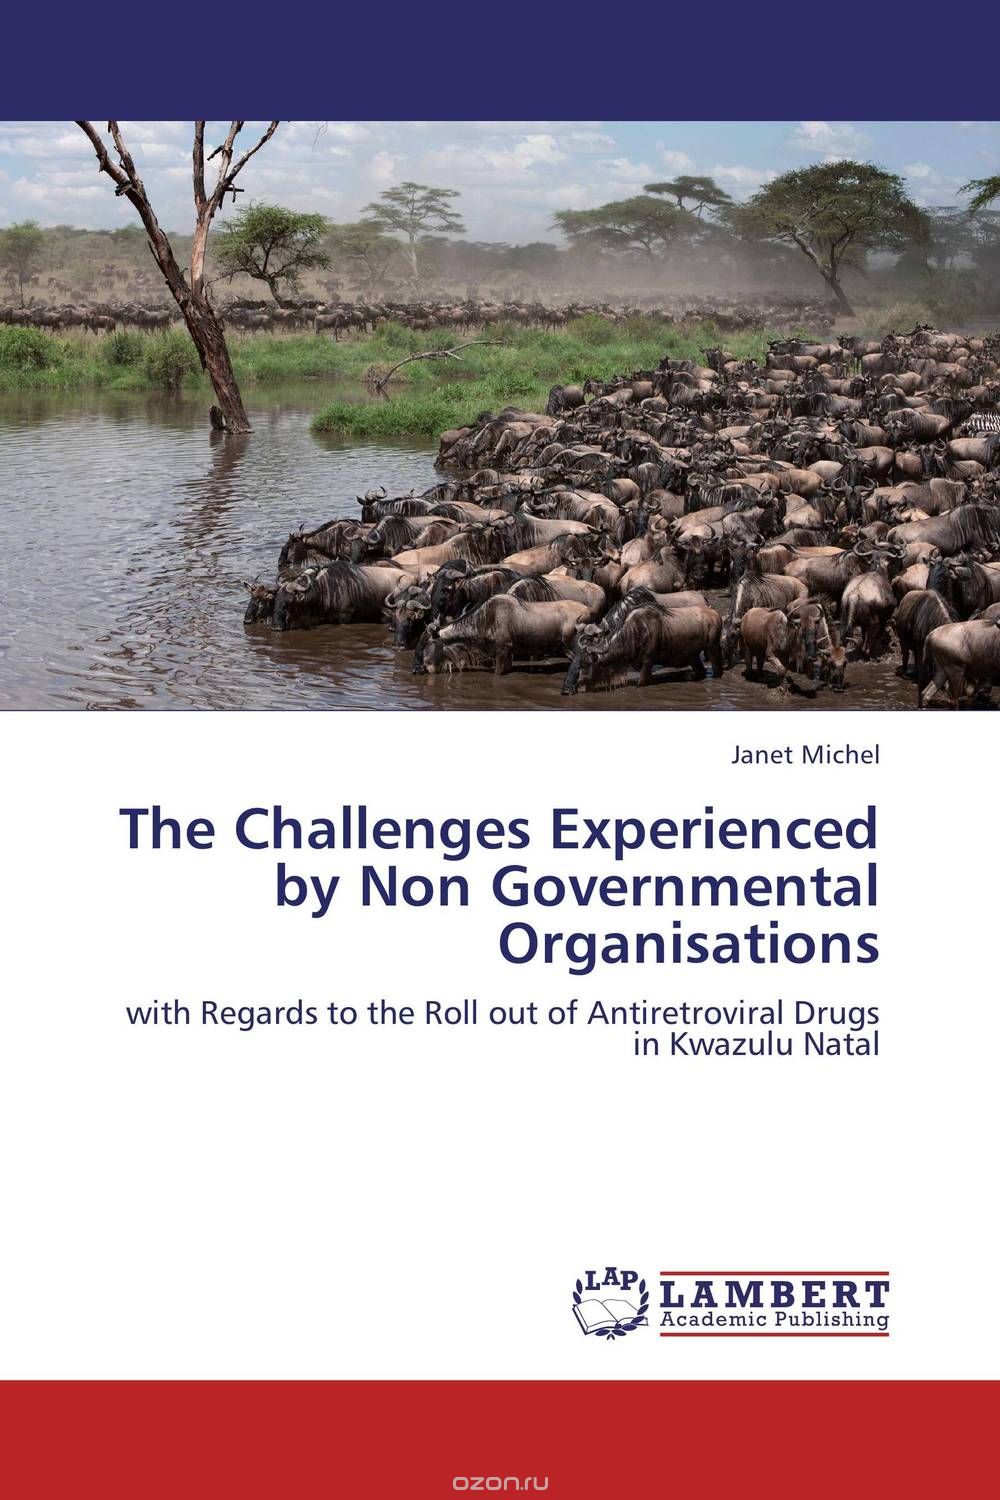 Скачать книгу "The Challenges Experienced by Non Governmental Organisations"